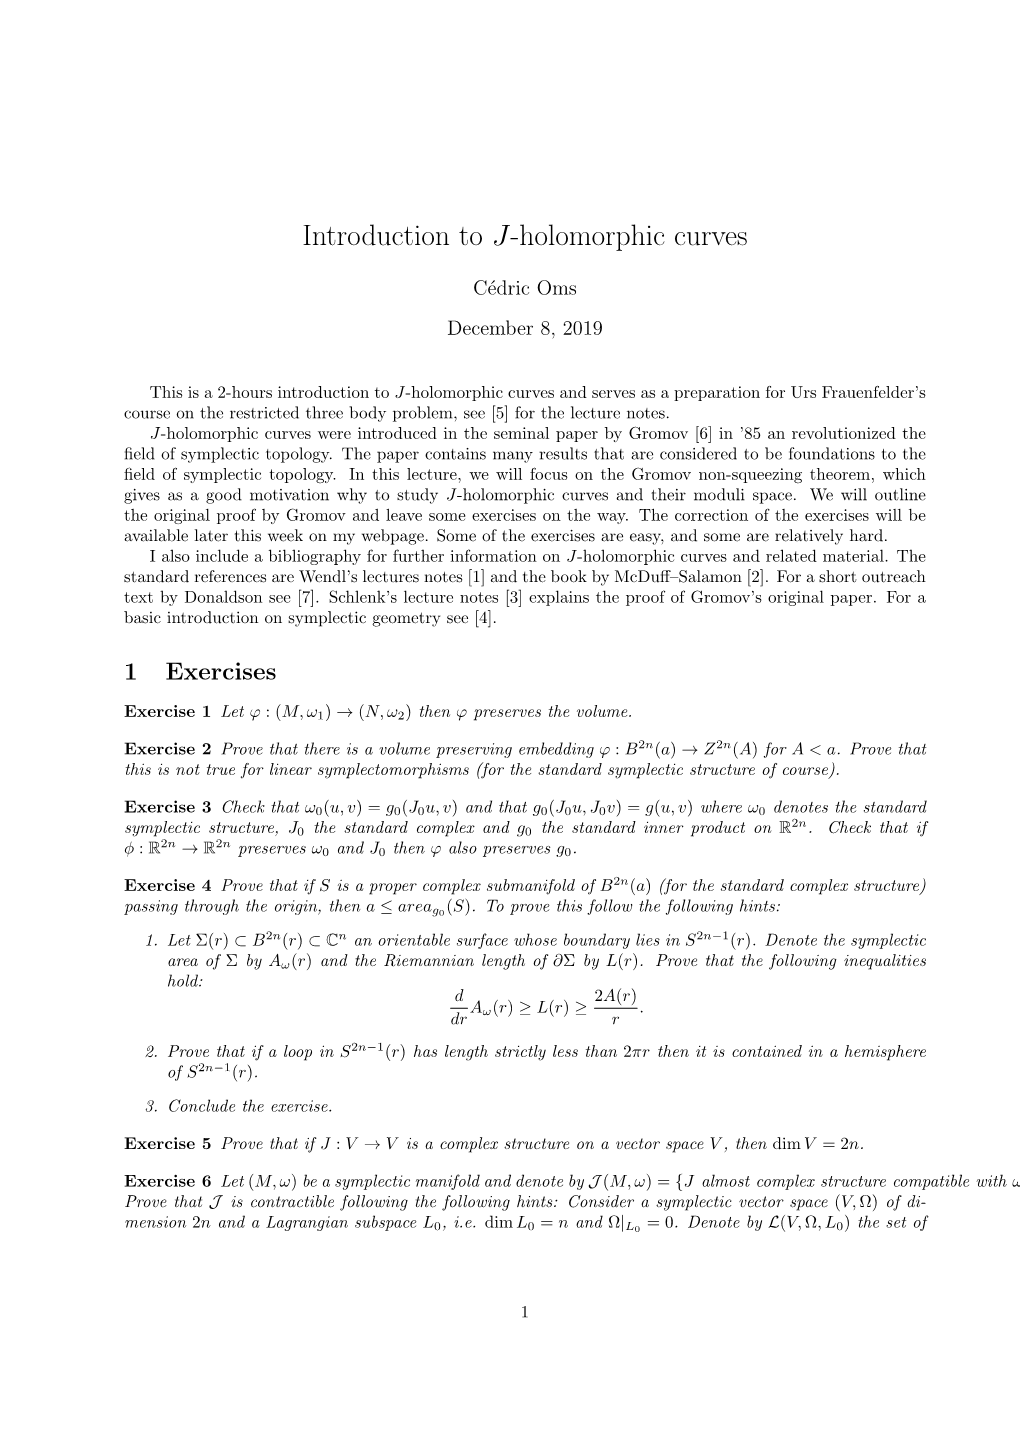 Introduction to J-Holomorphic Curves